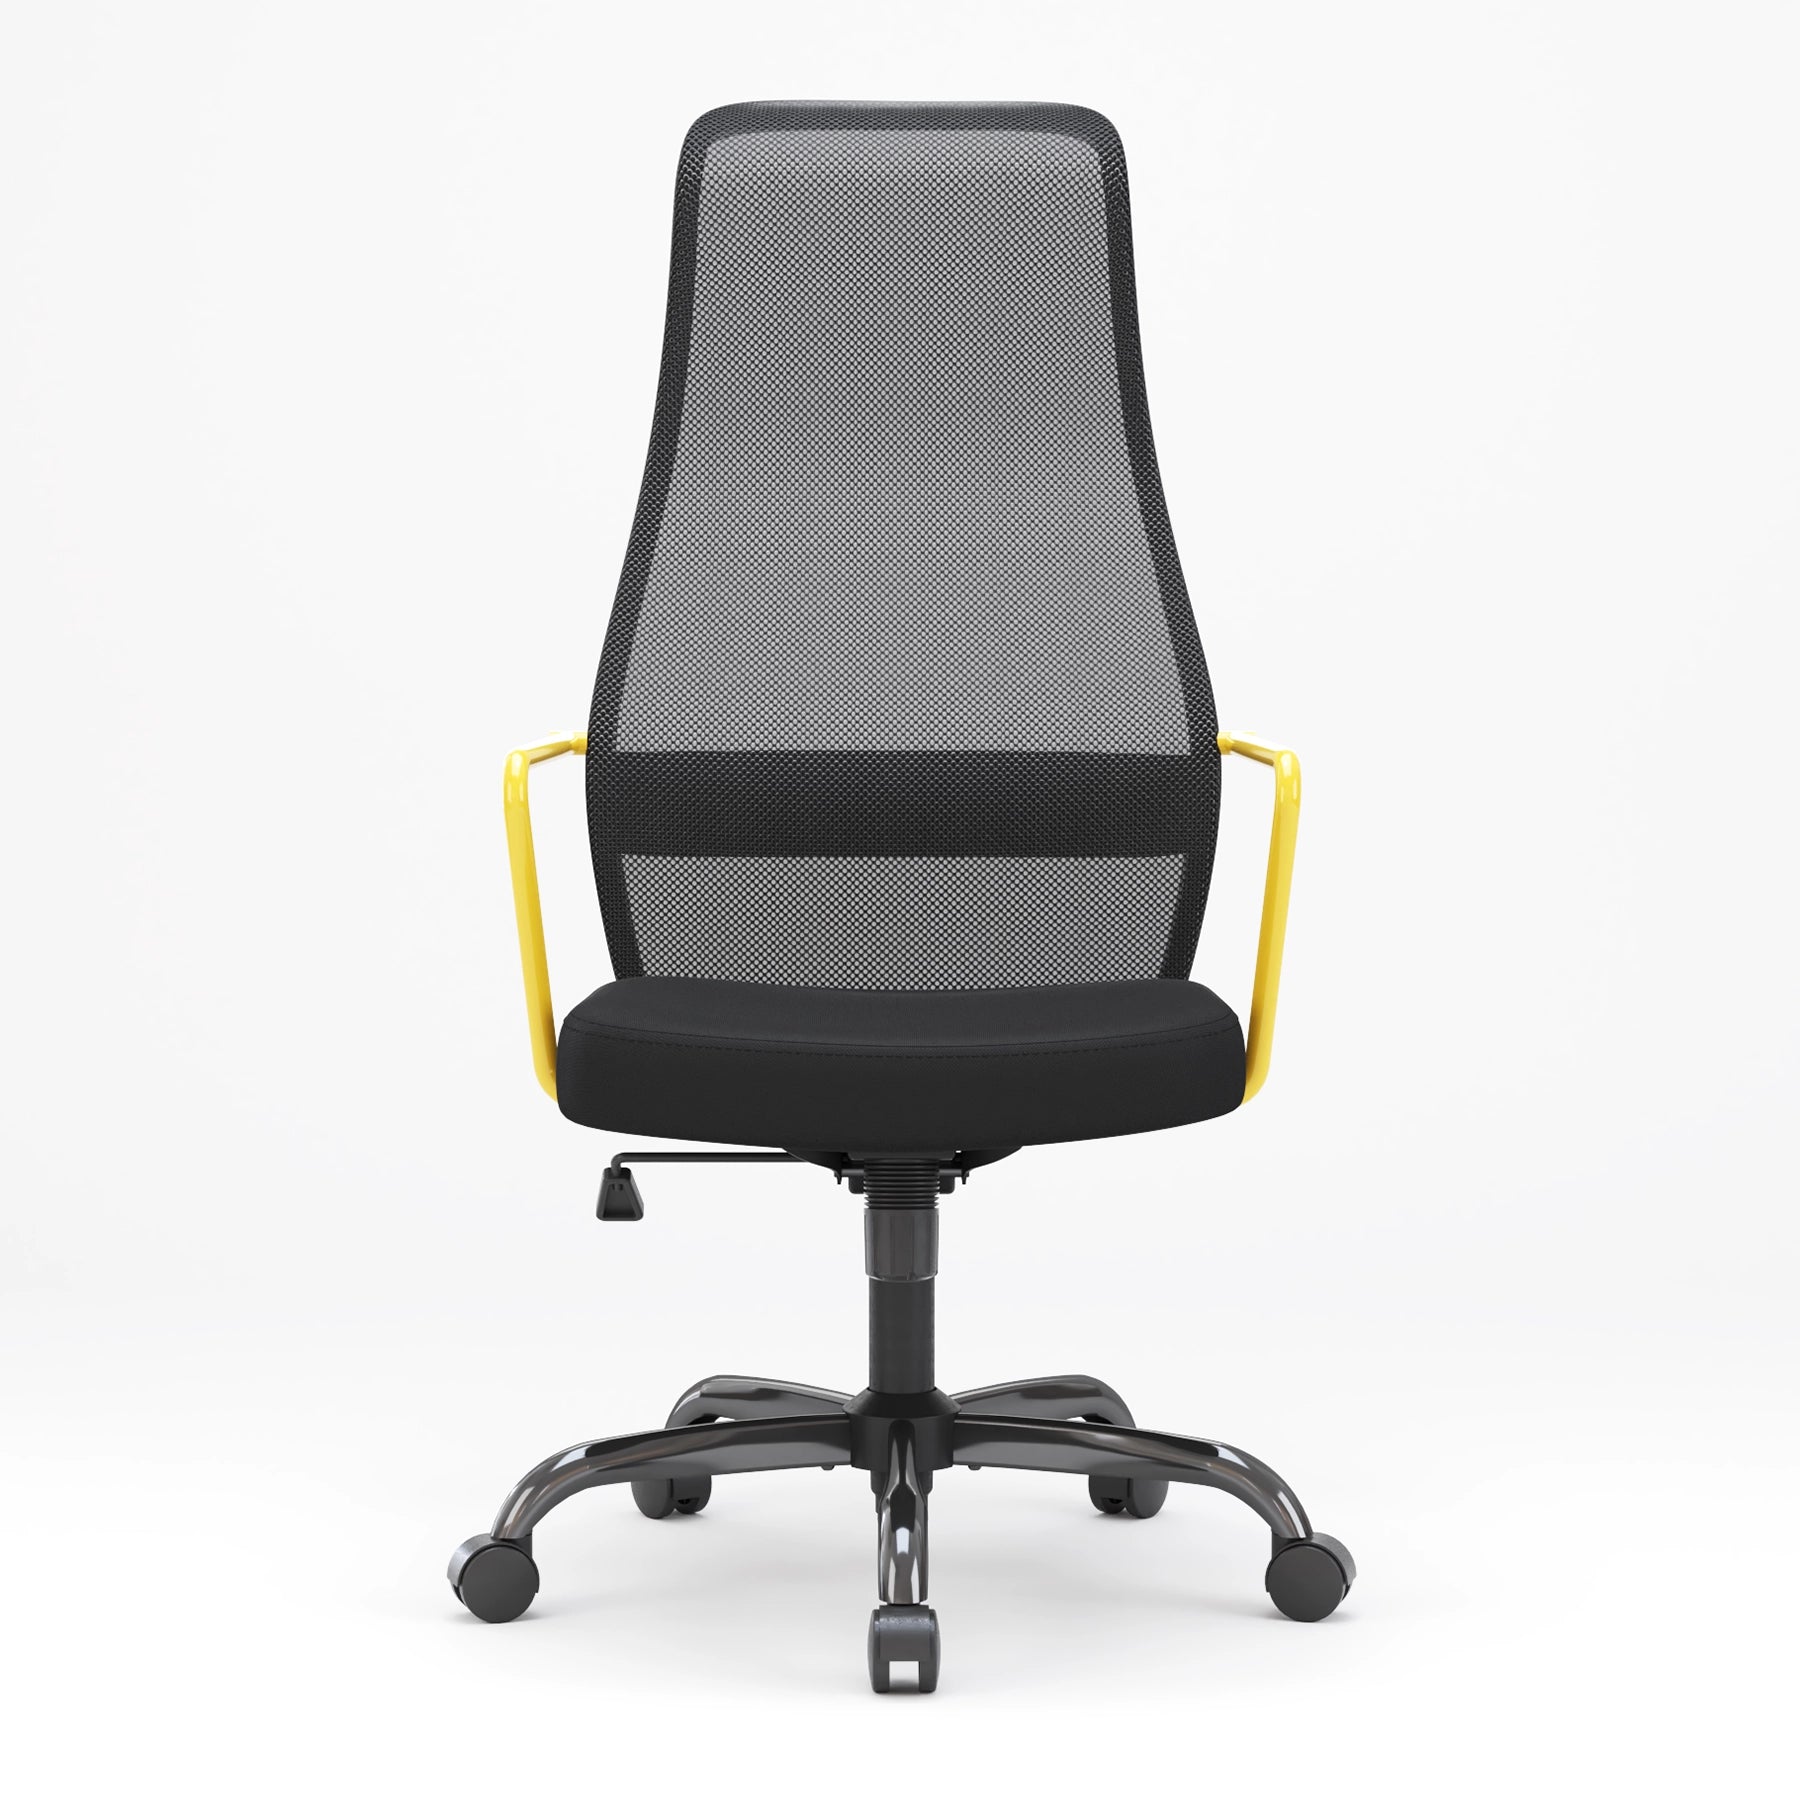 Sihoo M18 Classic Office Chair With Triple Spinal Relief - Coupon Codes,  Promo Codes, Daily Deals, Save Money Today